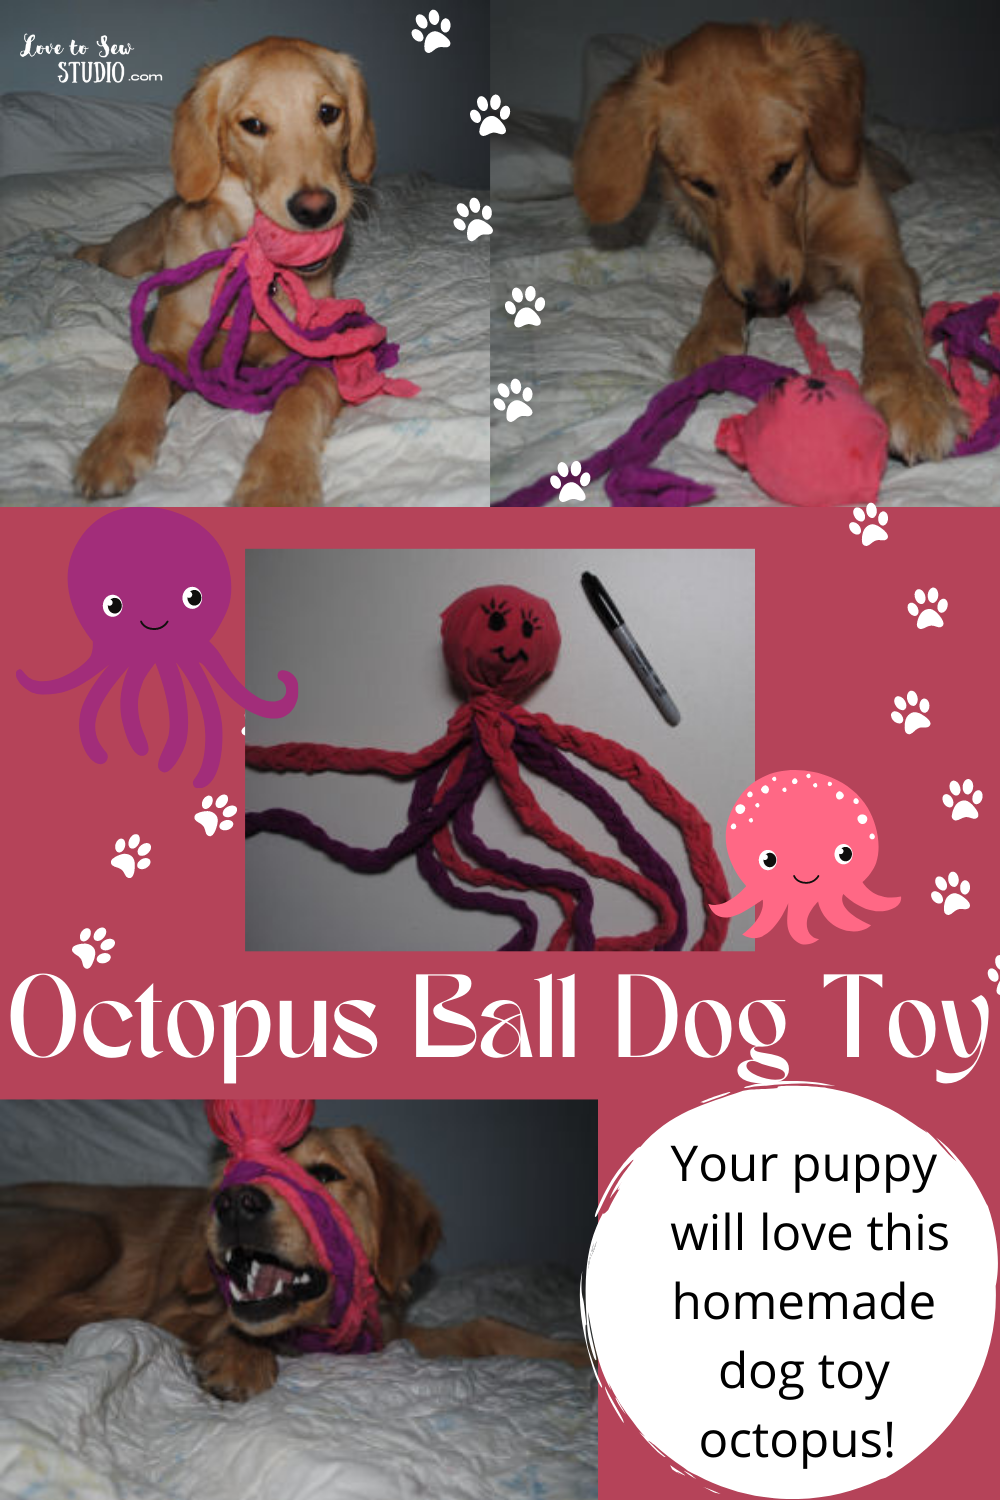 An Octopus Braided Ball Dog Toy